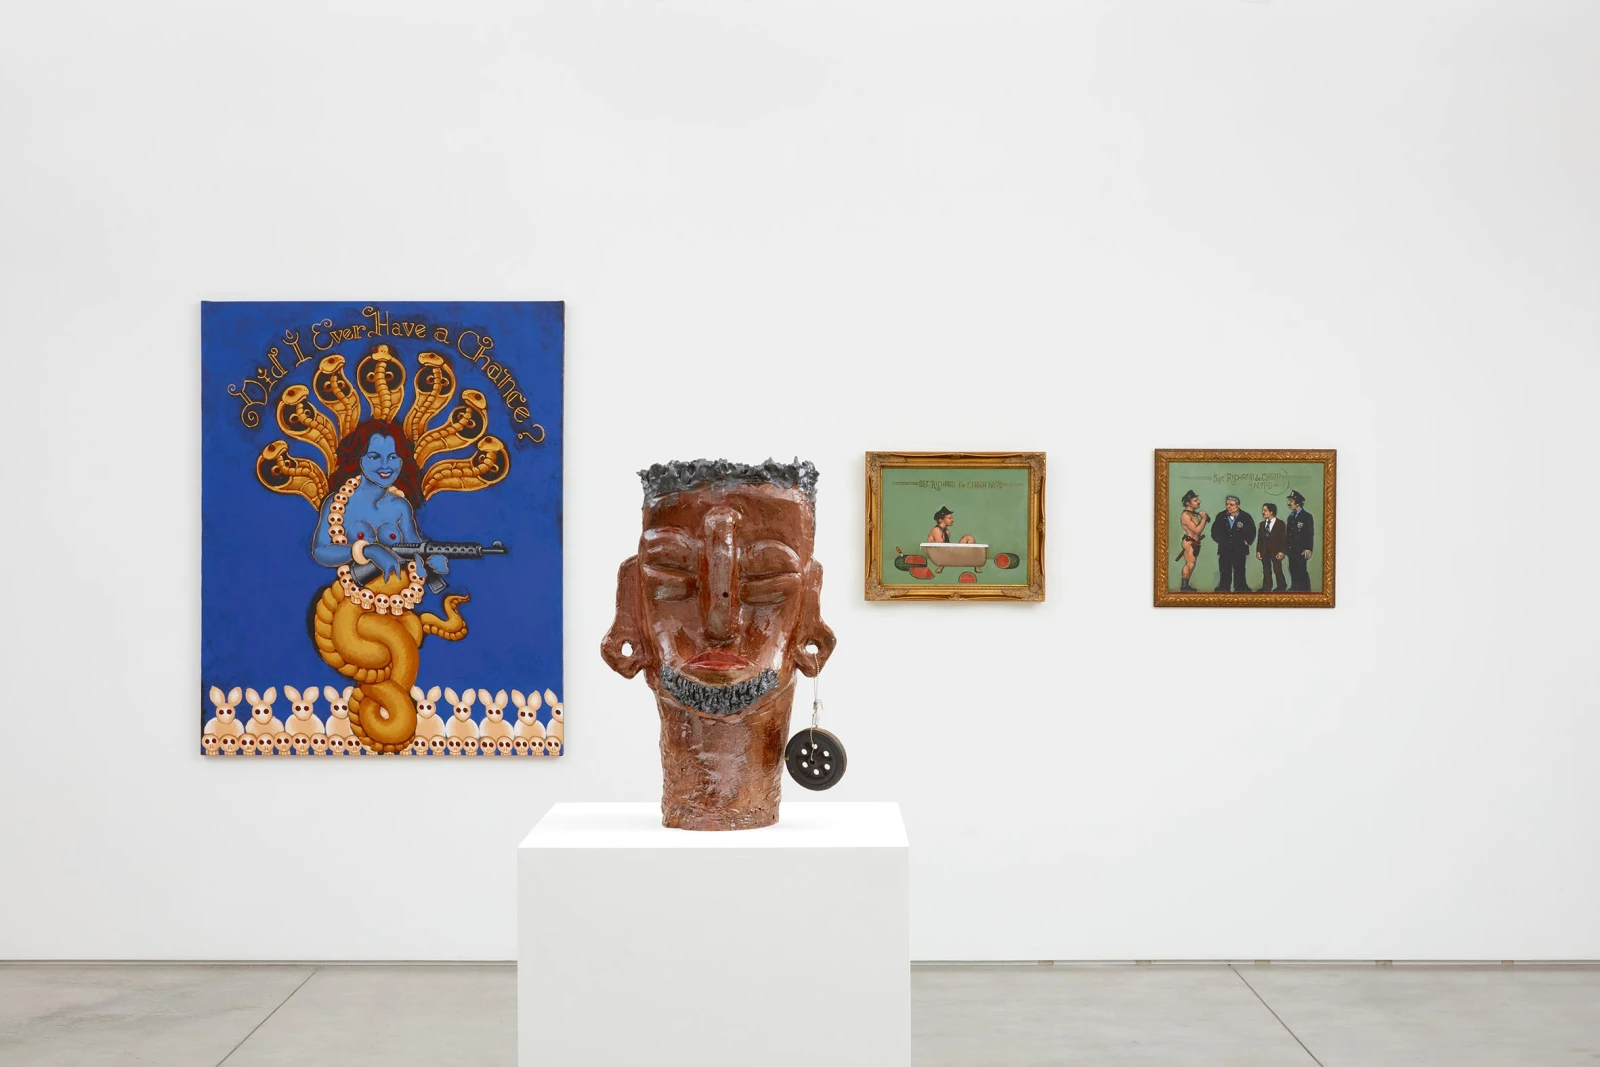 <p>Installation view: 'Did I Ever Have a Chance?', Group Exhibition, Marc Selwyn Fine Art in collaboration with Gordon Robichaux, Los Angeles, CA (2020). <span>Photo by Paul Salveson.</span></p>